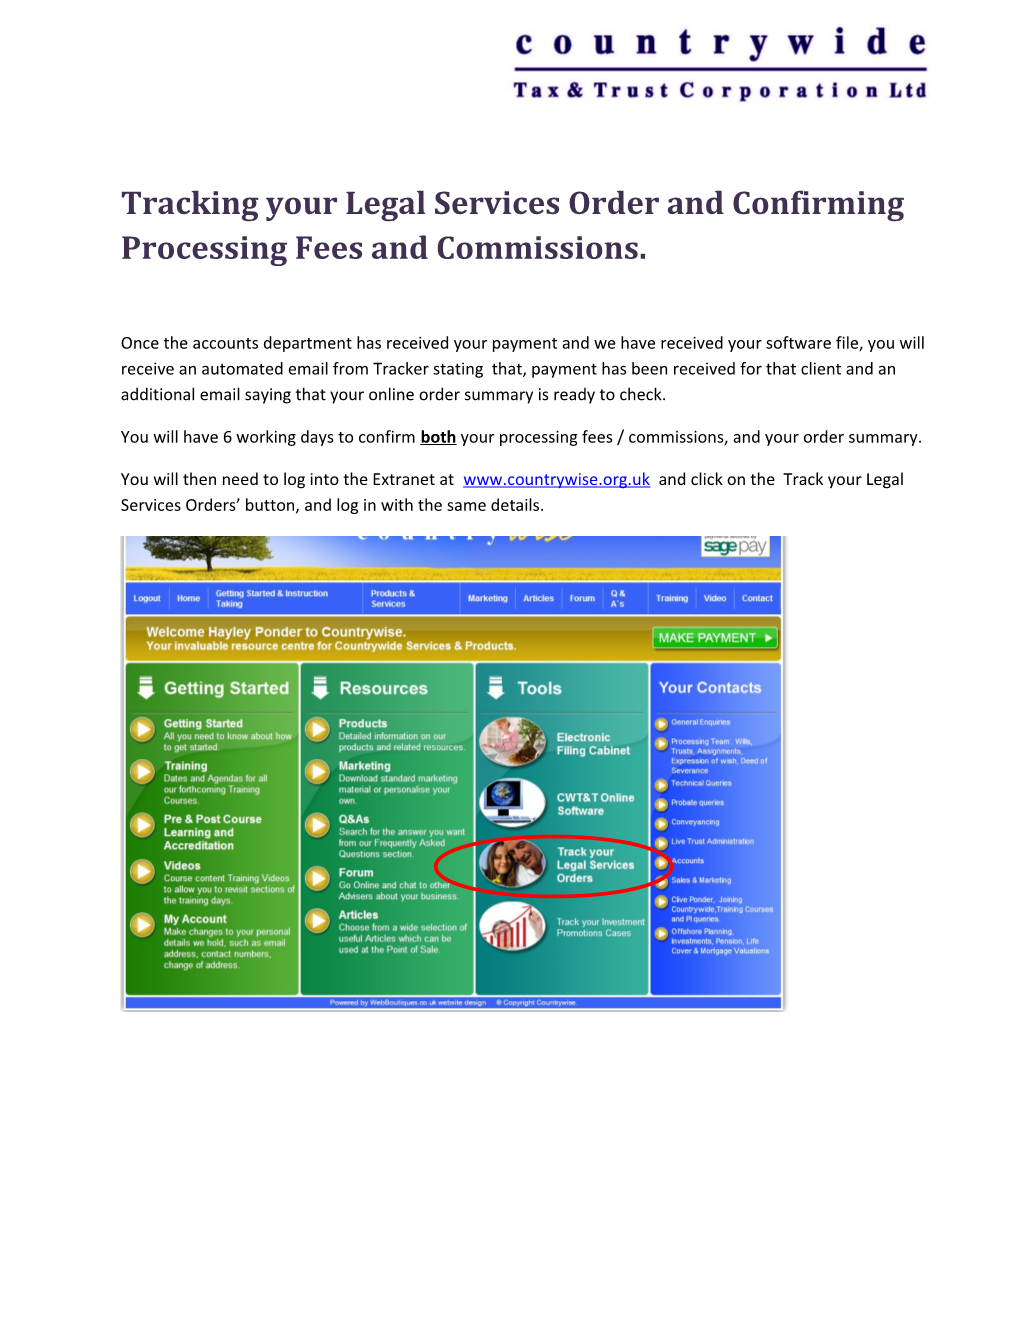 Tracking Your Legal Services Order and Confirming Processing Fees and Commissions